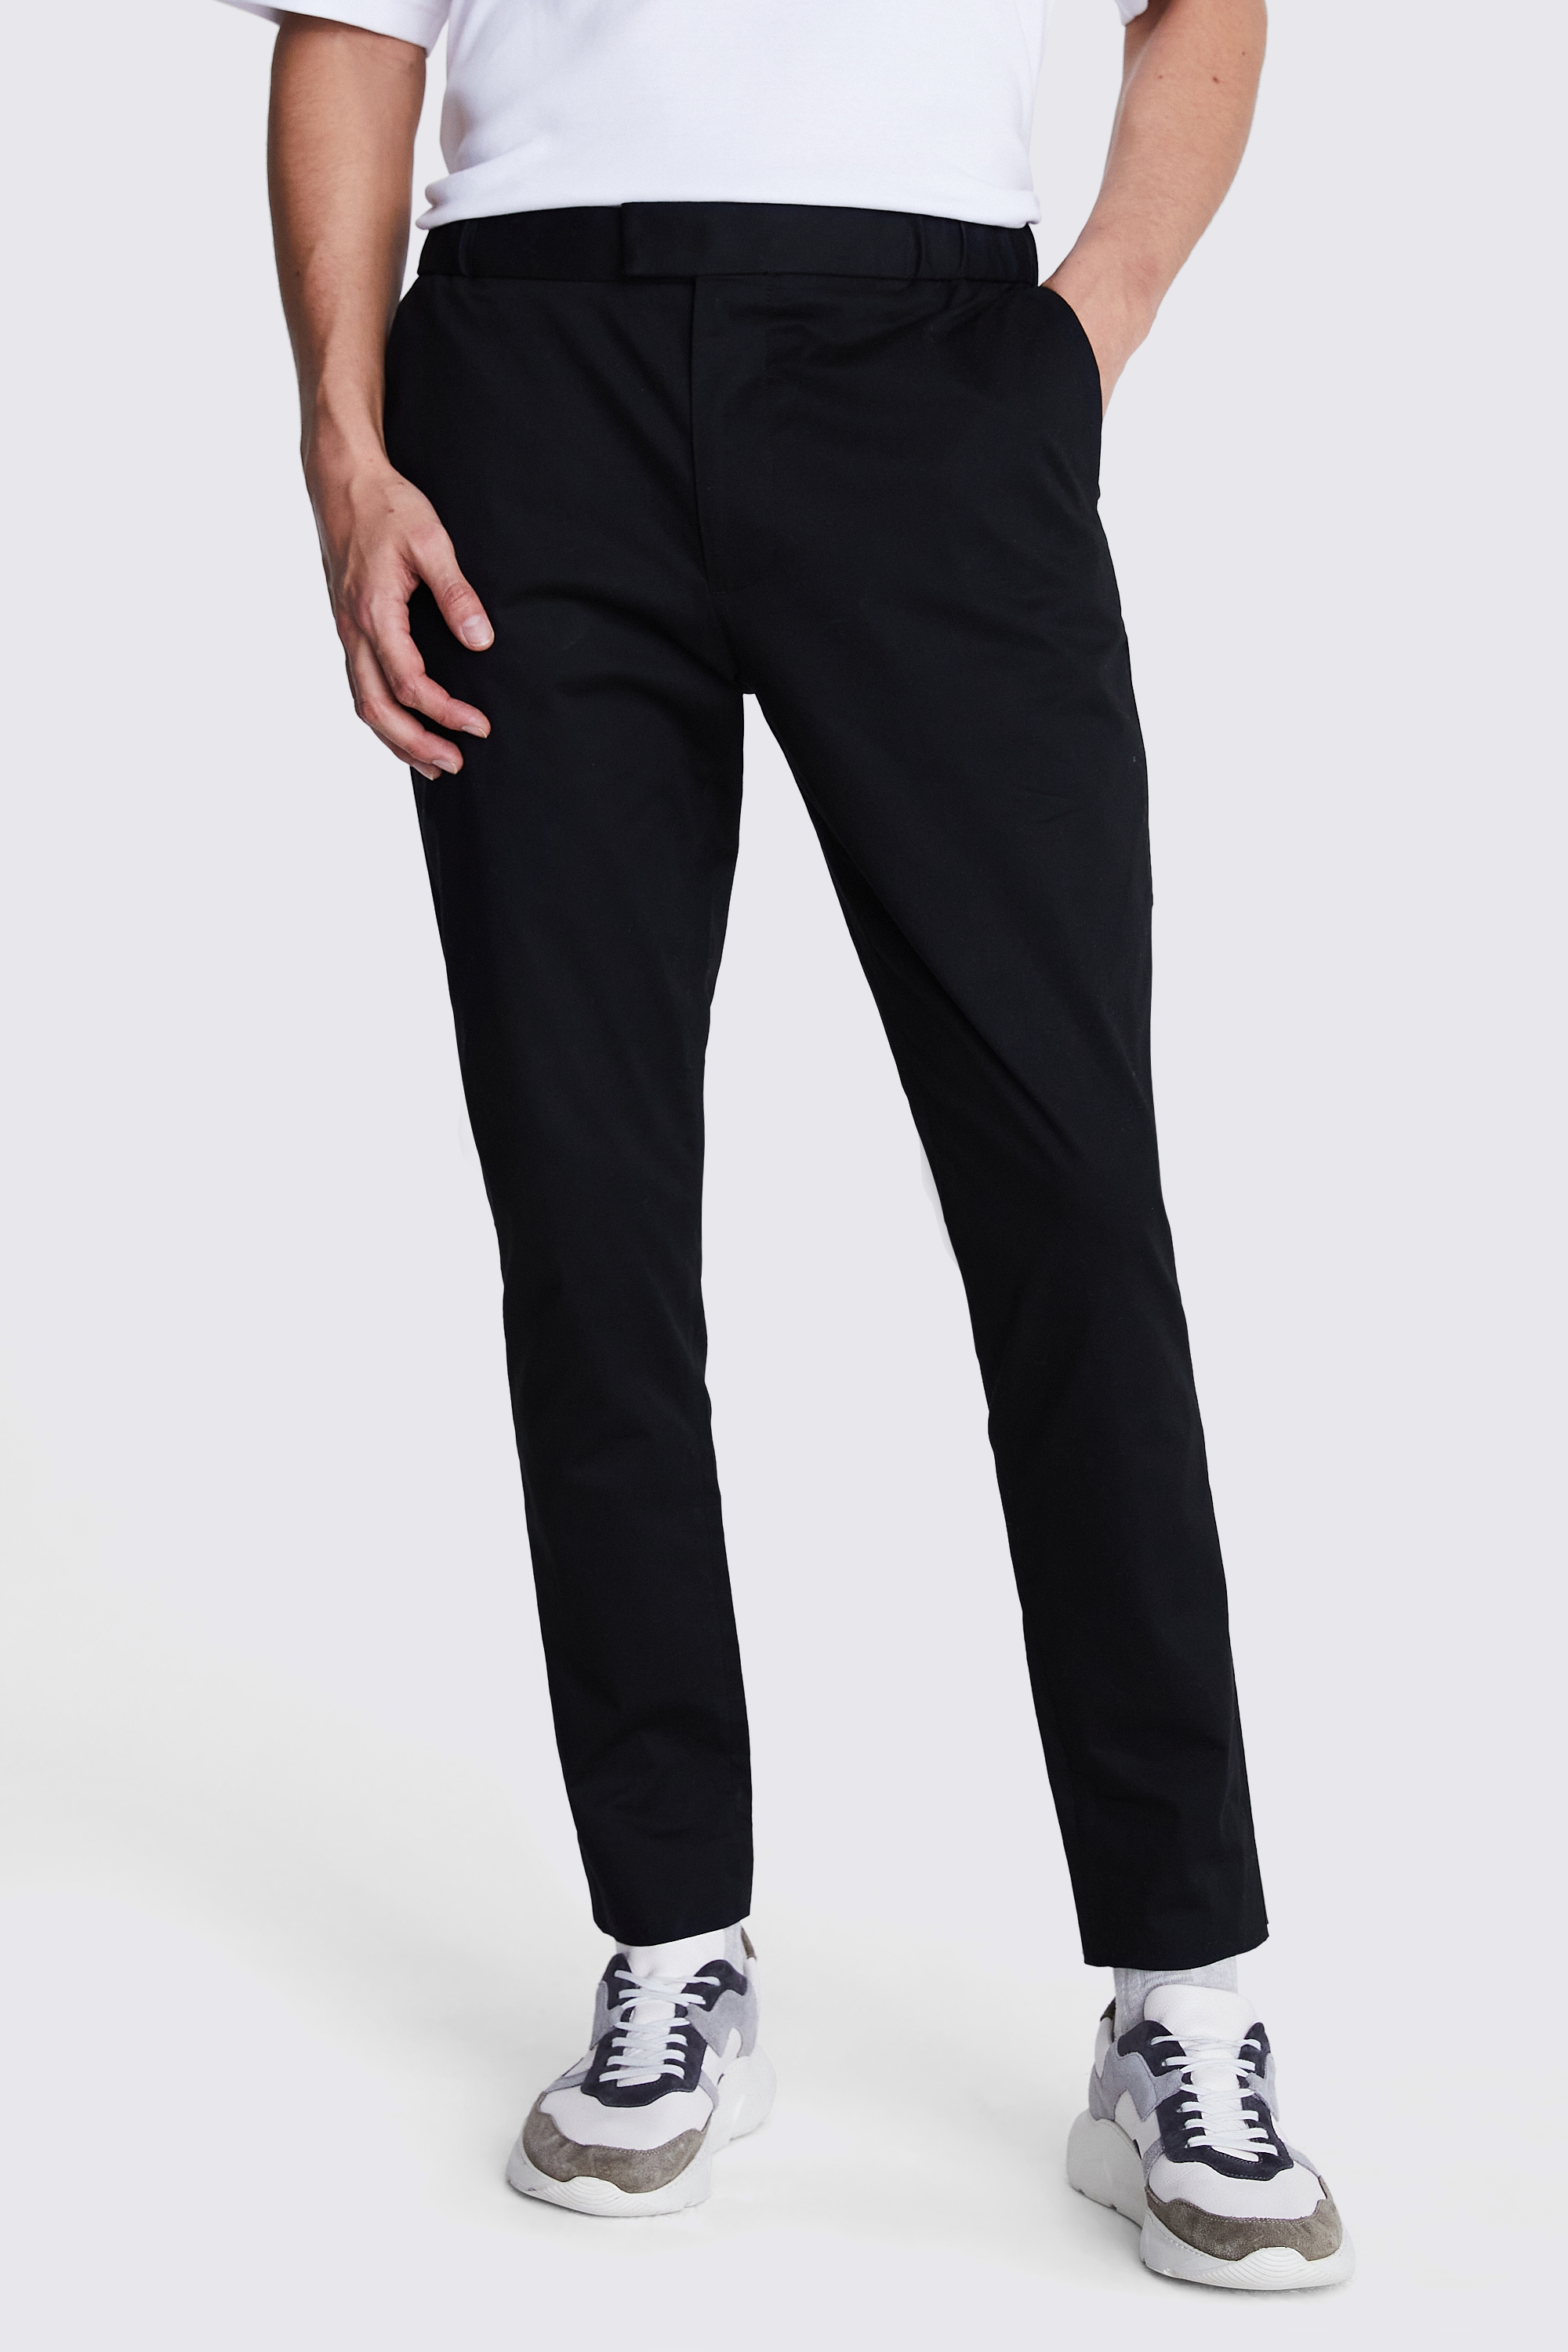 Black Worker Chinos | Buy Online at Moss